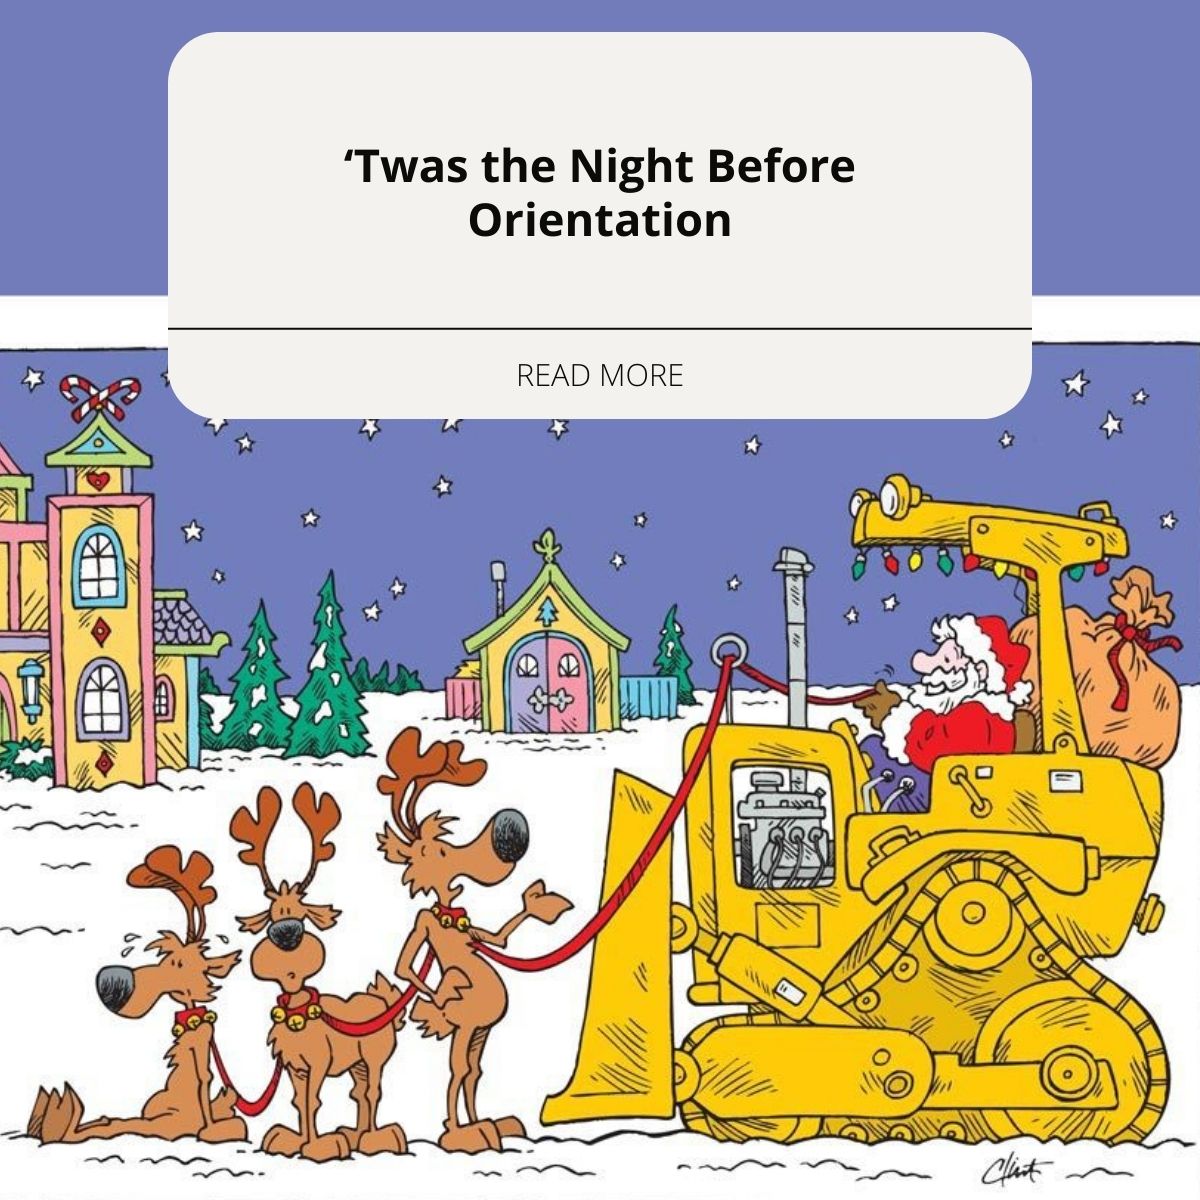 Enjoy a festive tale of efficient workflows and streamlined processes on the night before orientation, brought to you by SiteOne